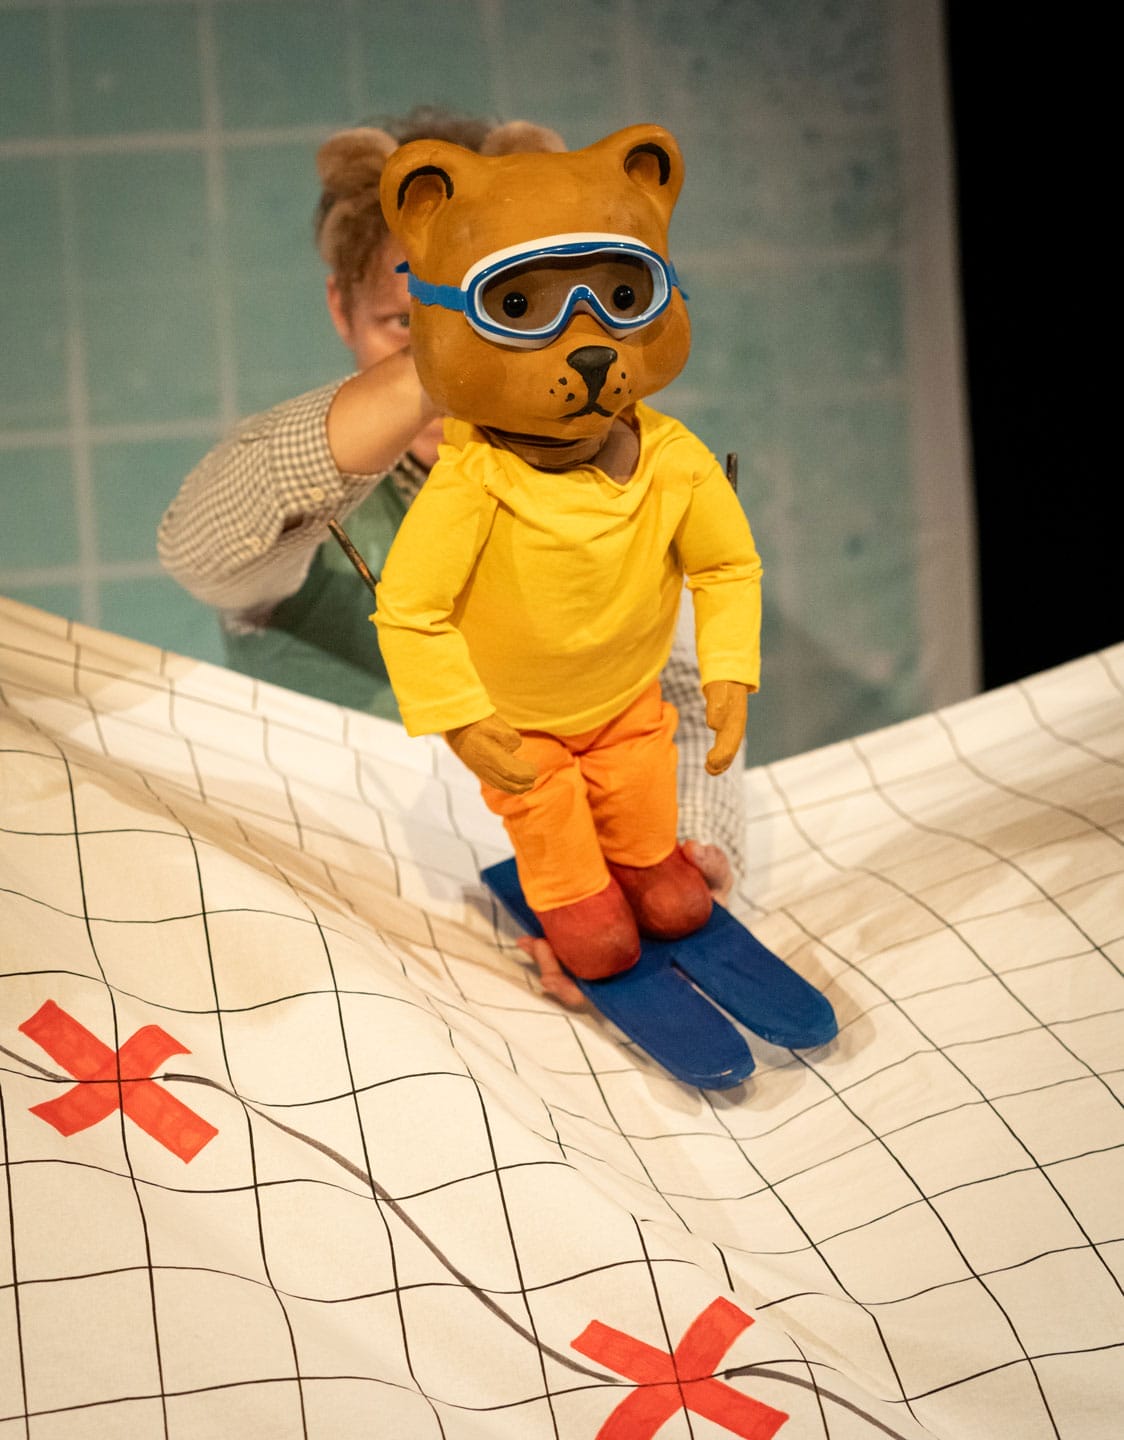 A puppet of a bear wearing a yellow jumper, orange trousers and goggles is sking on a paper landscape.